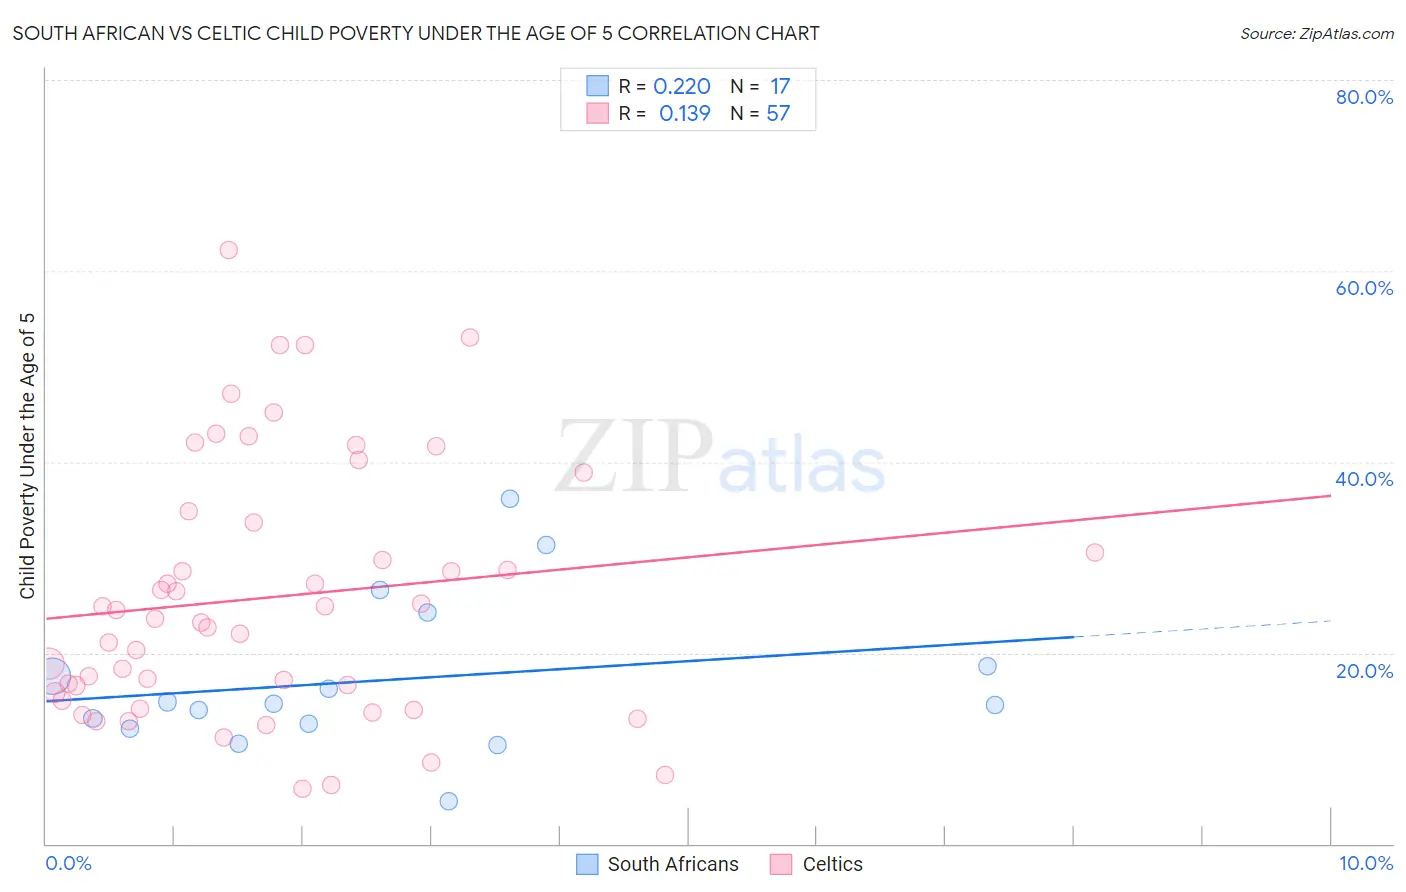 South African vs Celtic Child Poverty Under the Age of 5